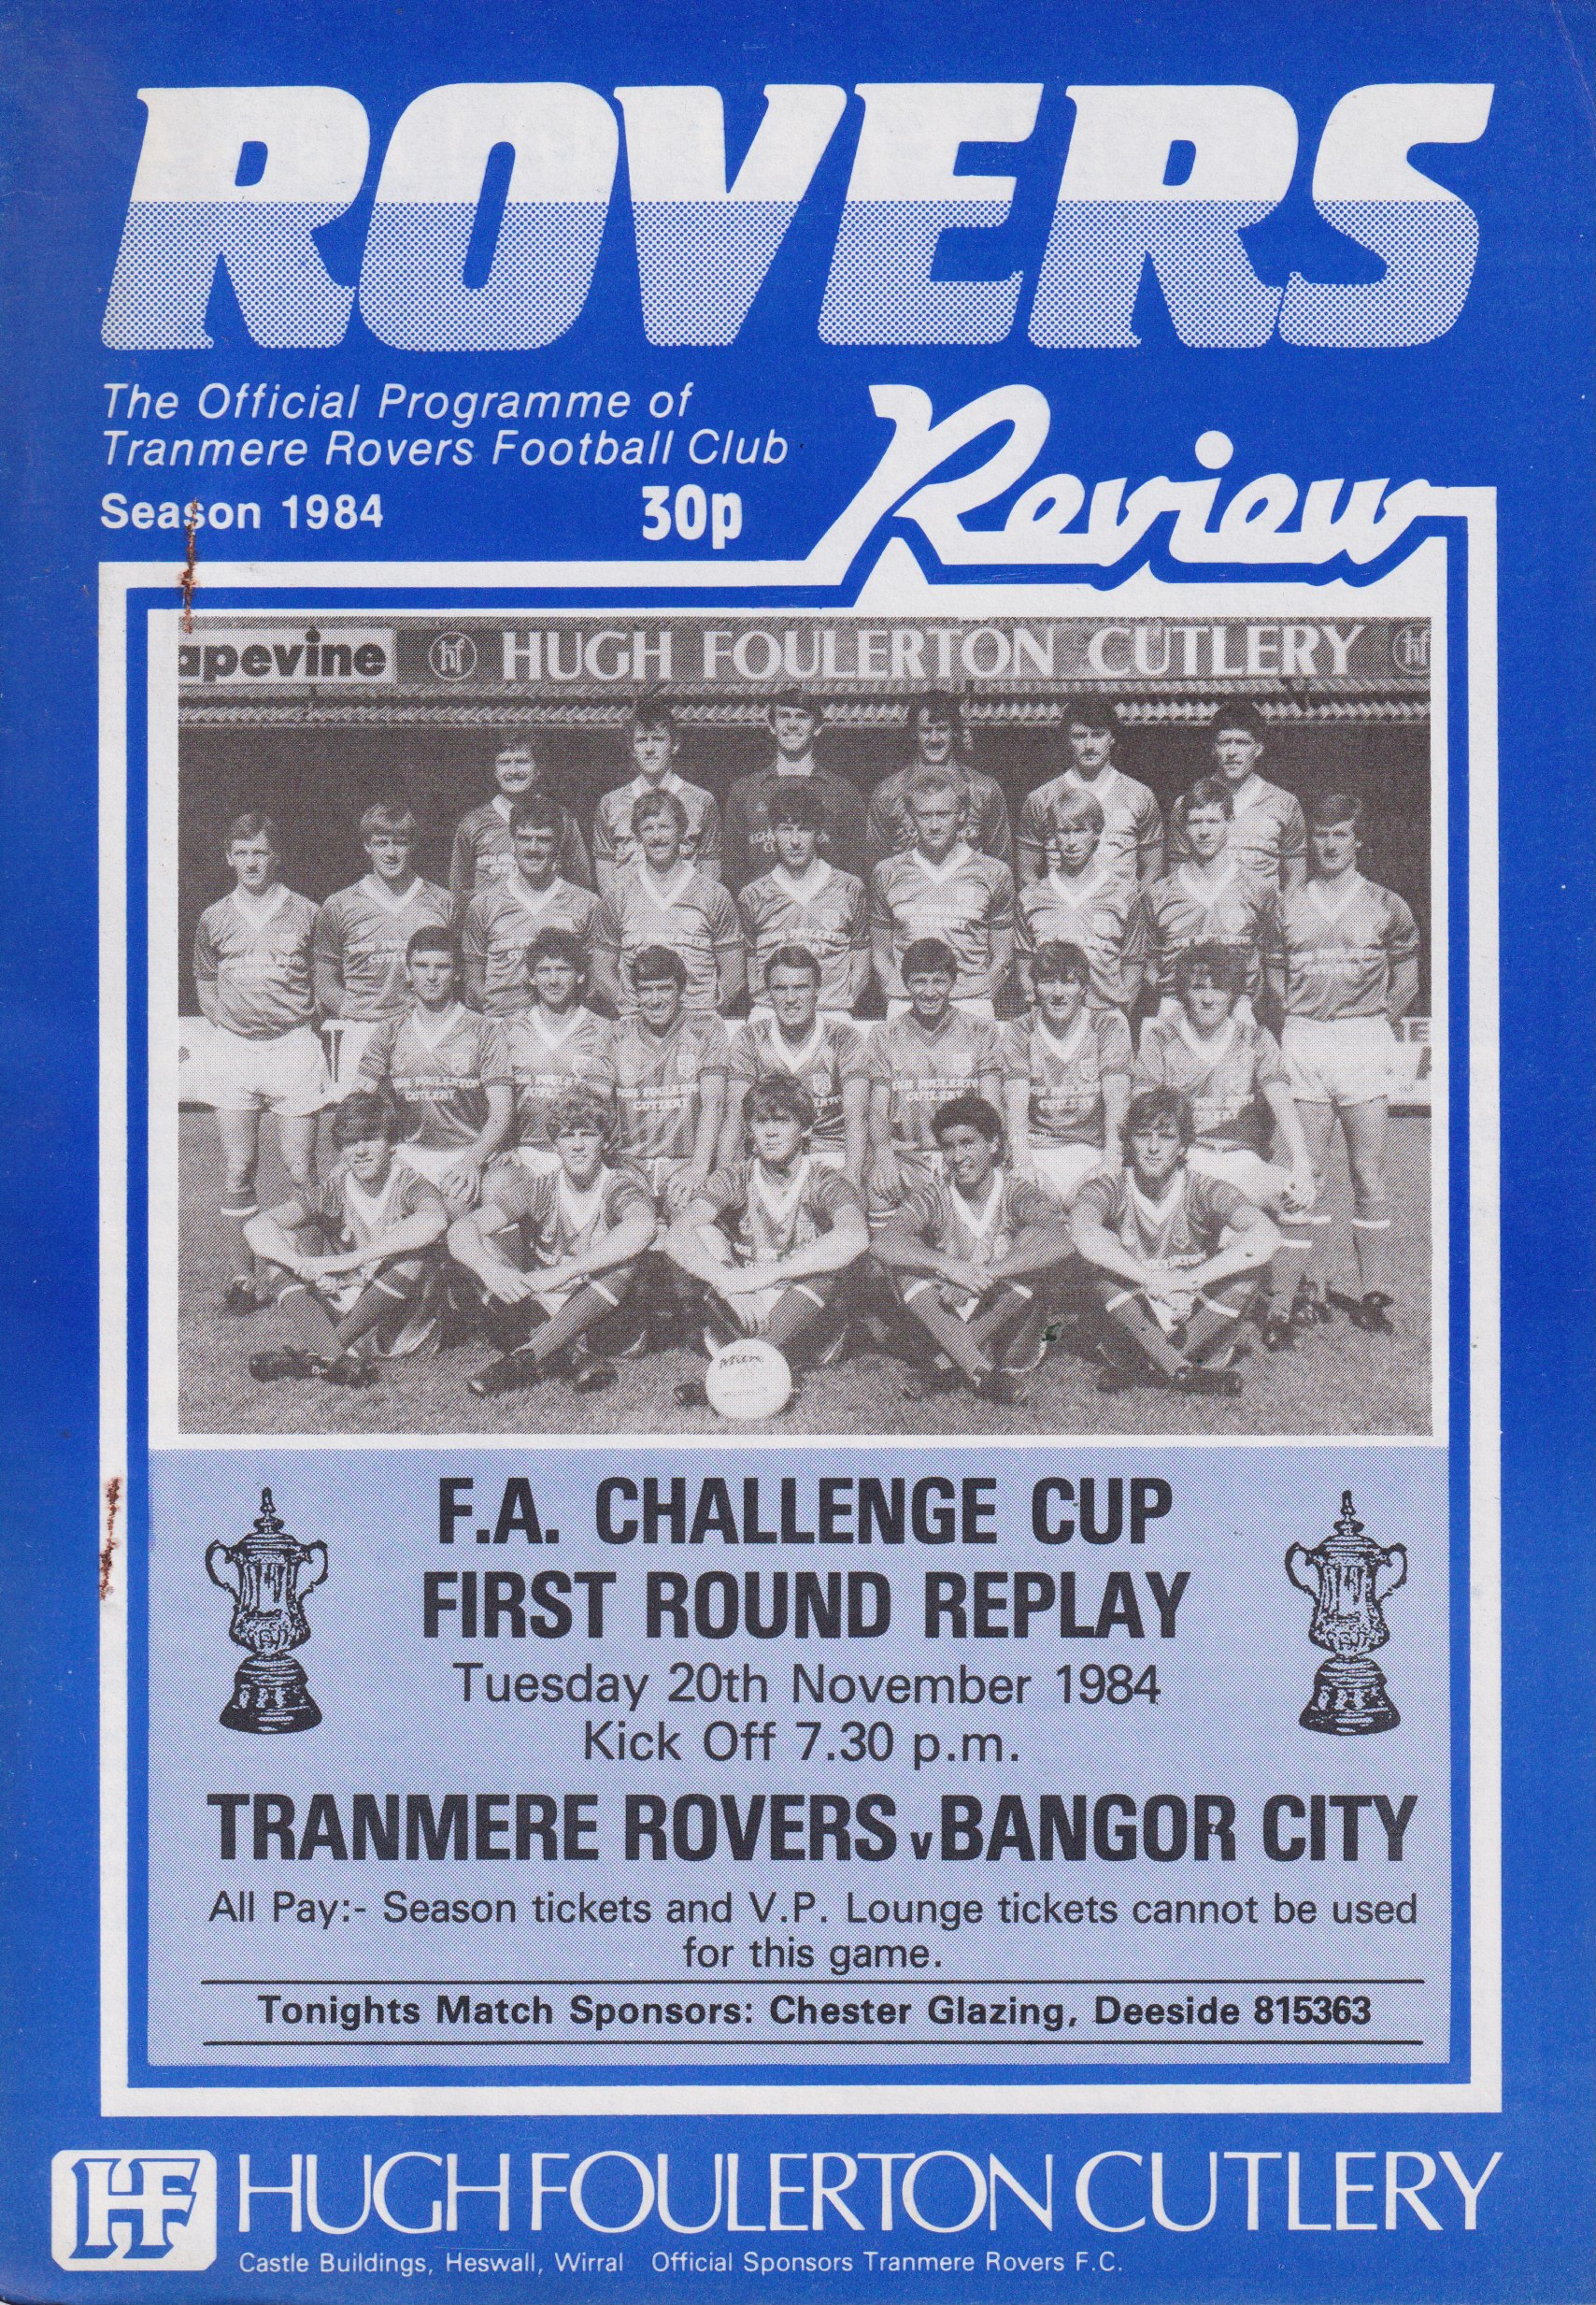 Match Programme For {home}} 7-0 Bangor City, FA Cup, 1984-11-20